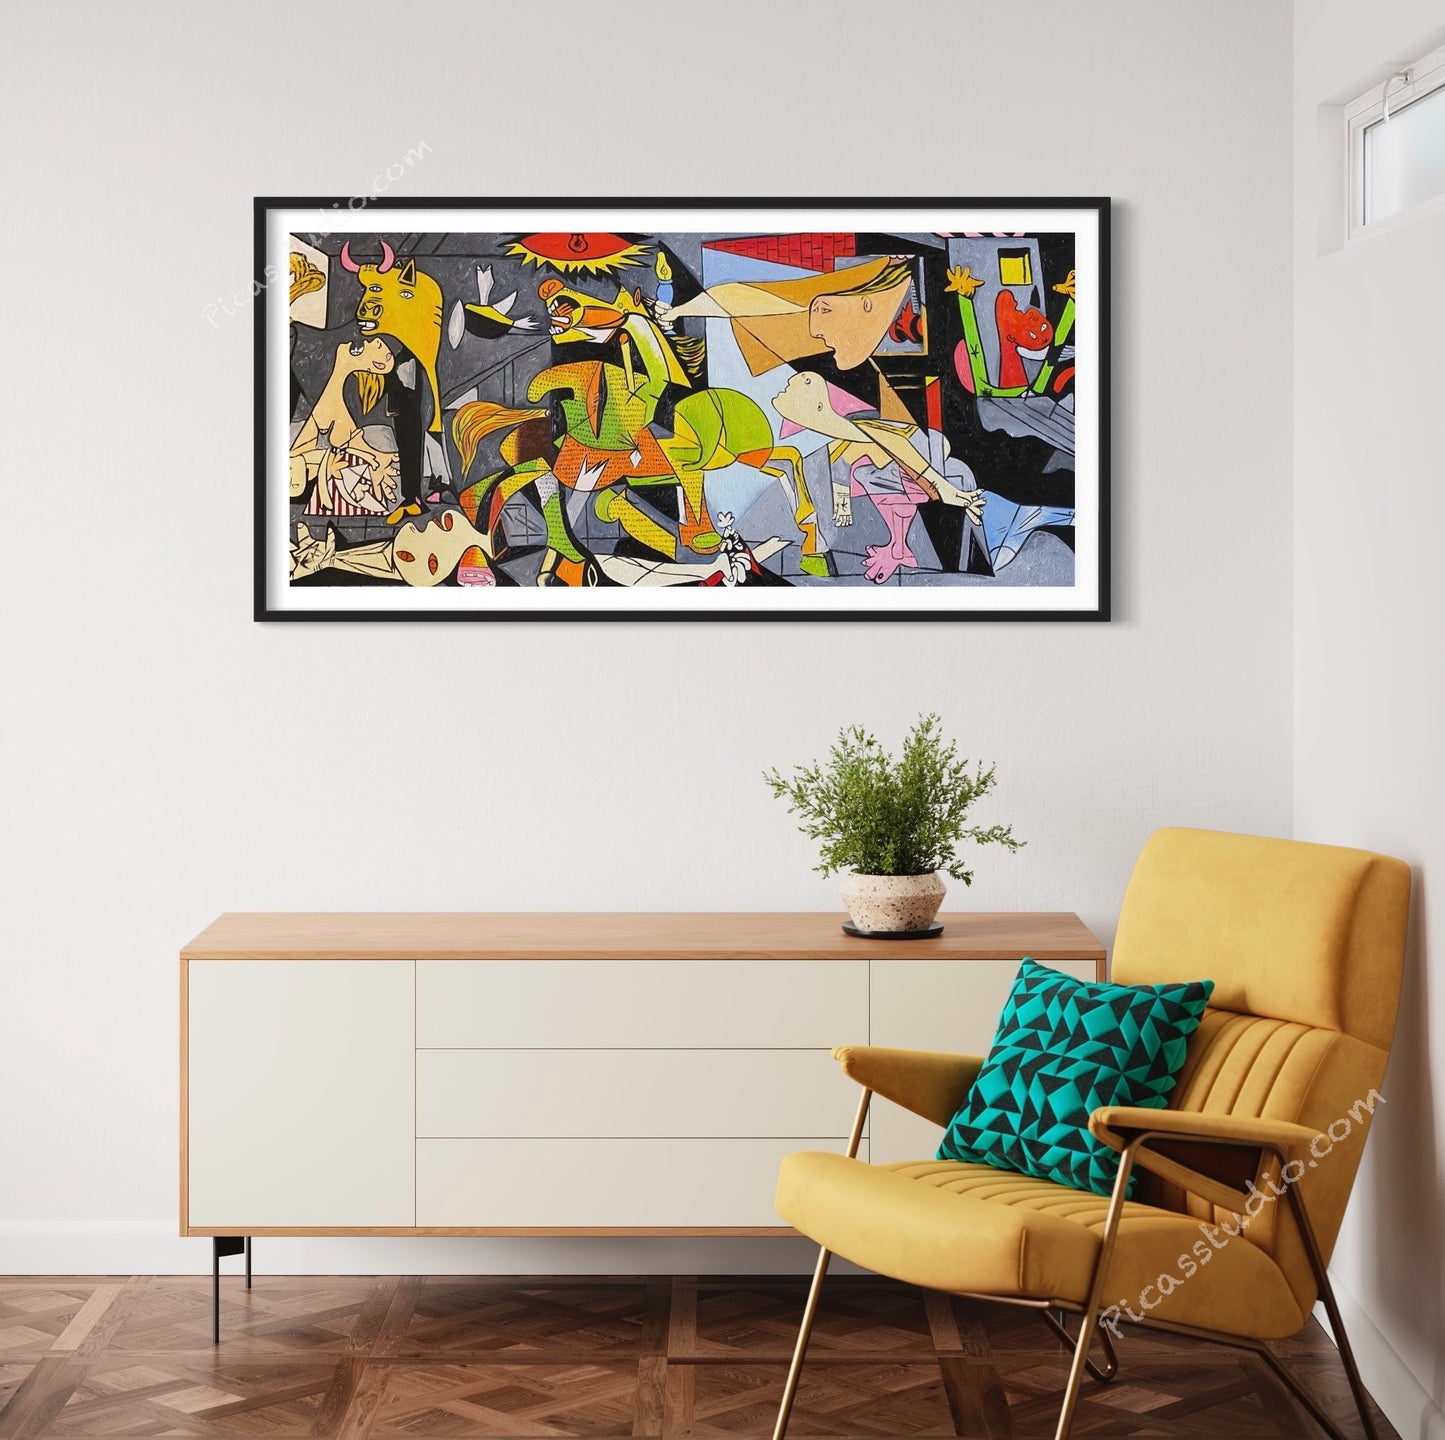 Pablo Picasso Oil Painting Guernica 1937 Colorful Version Green Yellow Hand Painted Art on Canvas Wall Decor Unframed